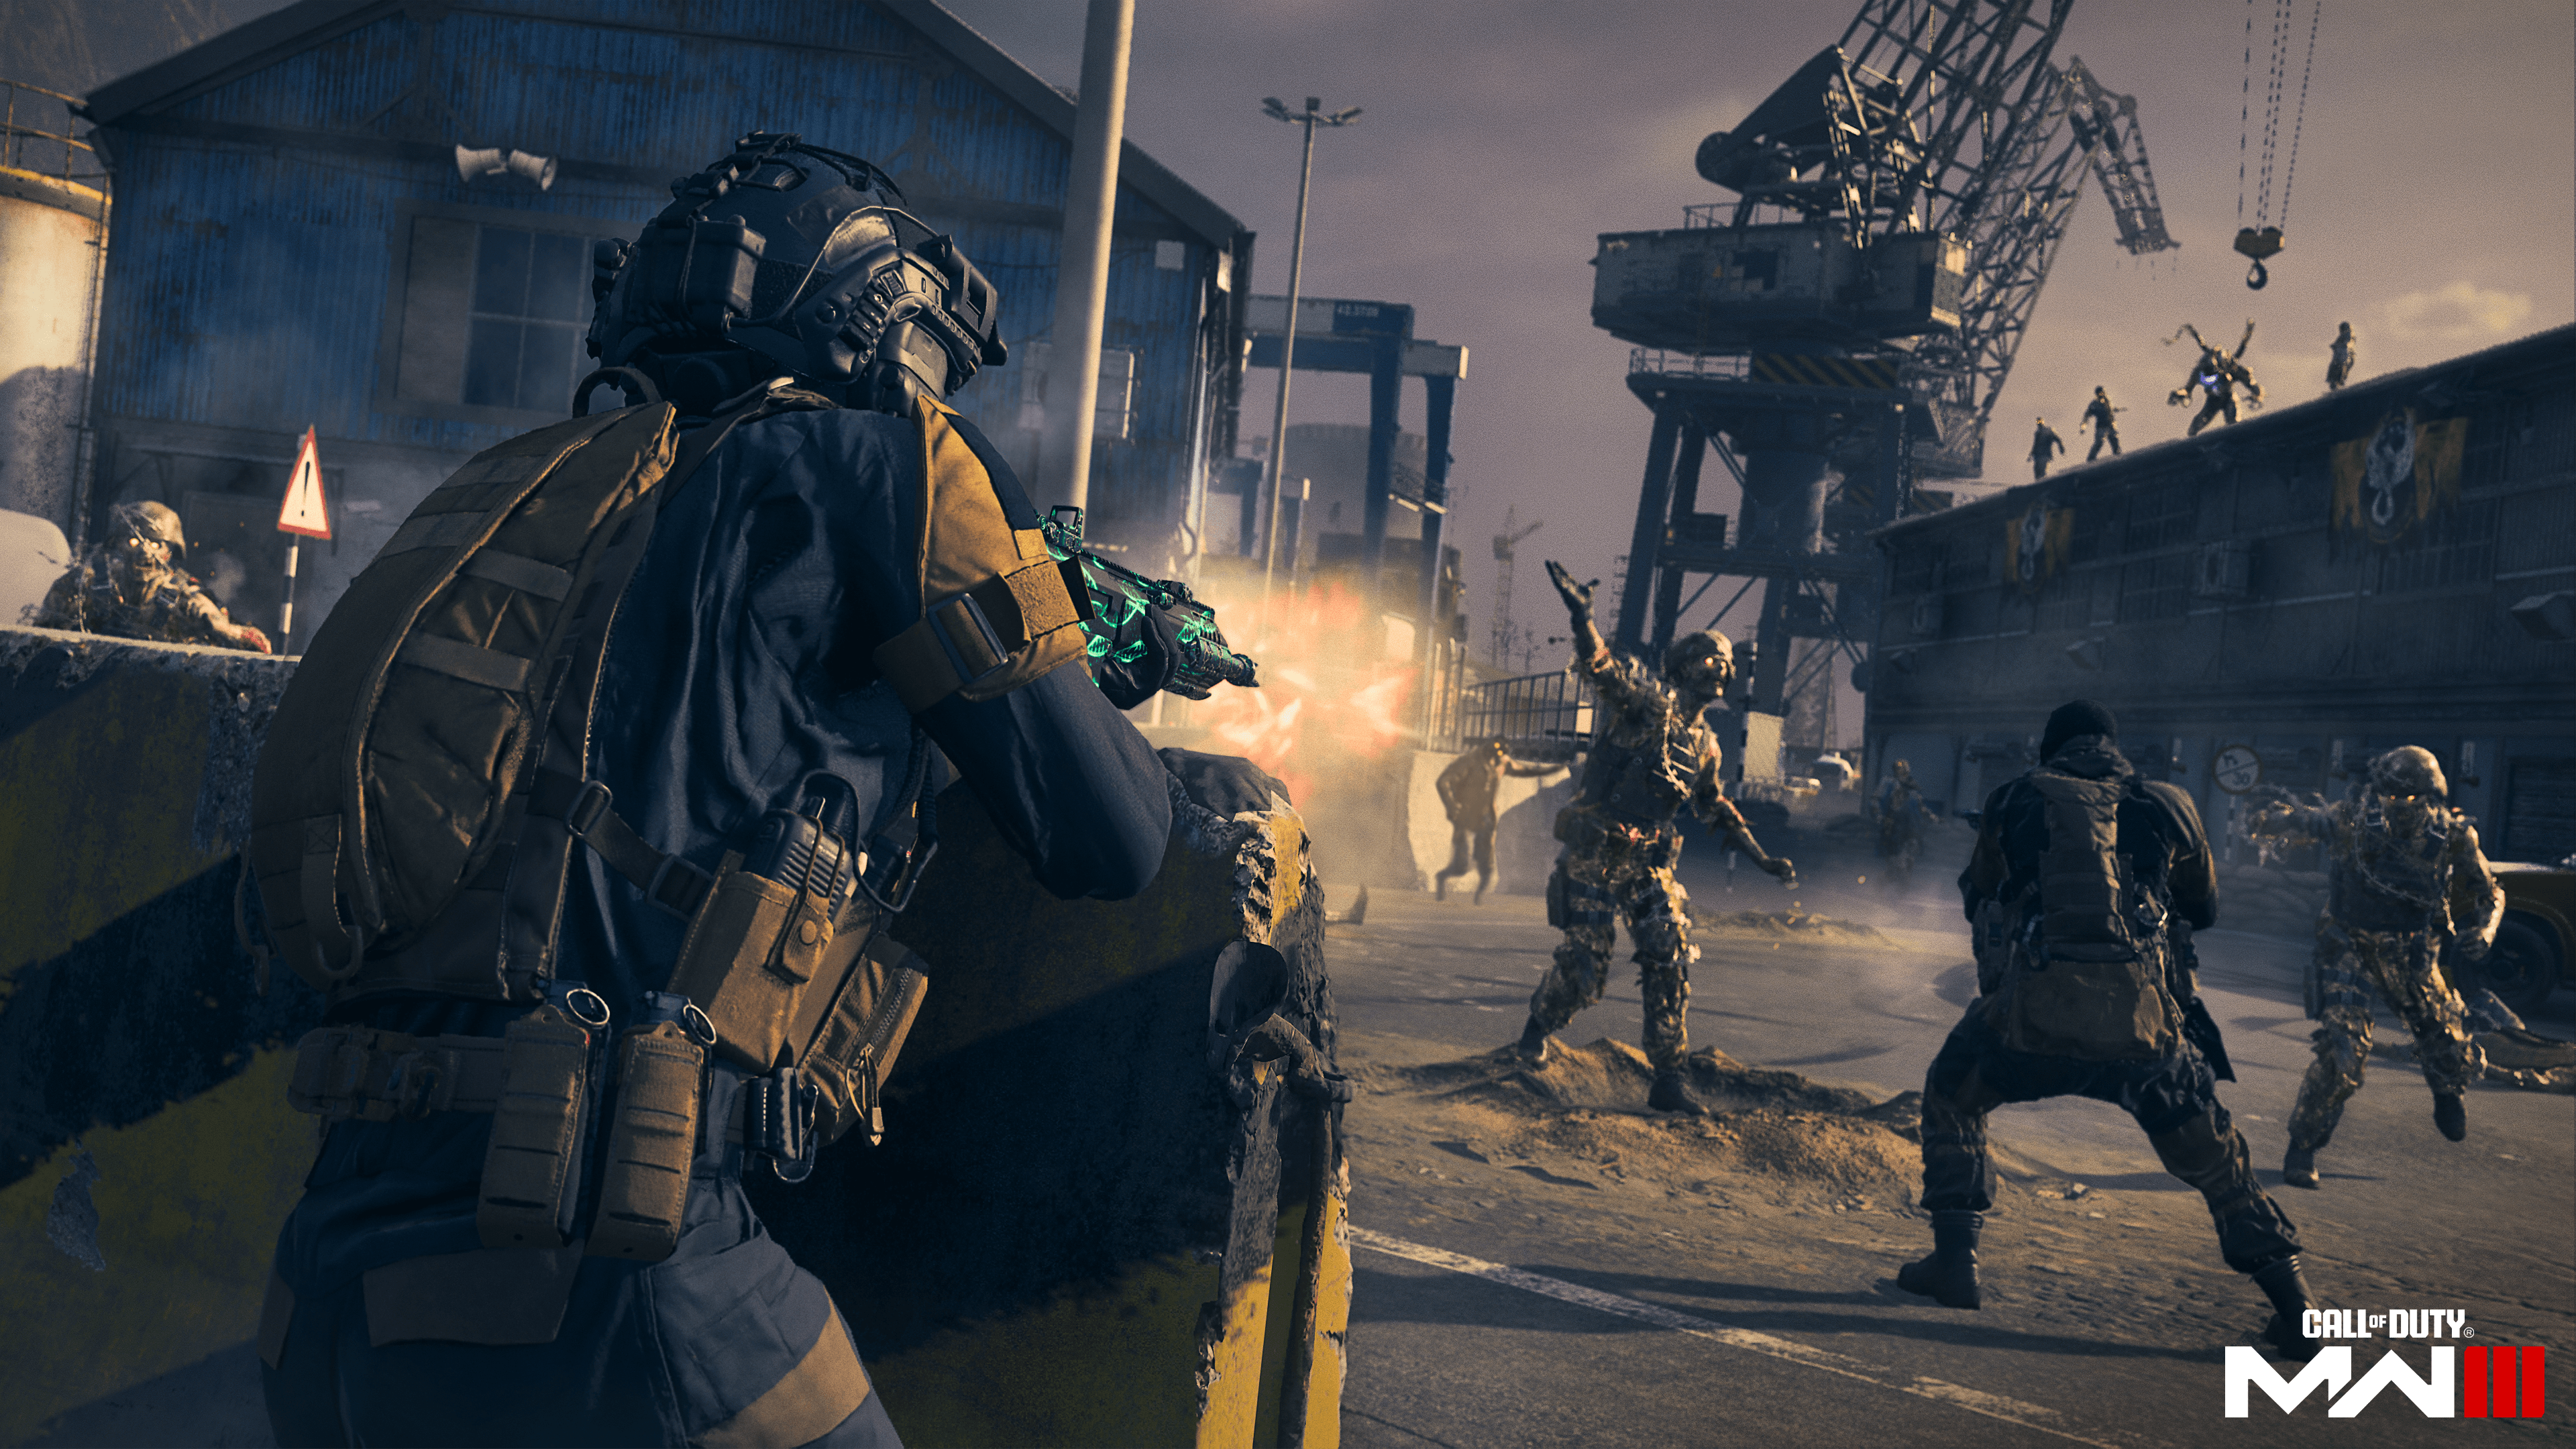 Call Of Duty 2023 is full game claims report – maybe Modern Warfare 3